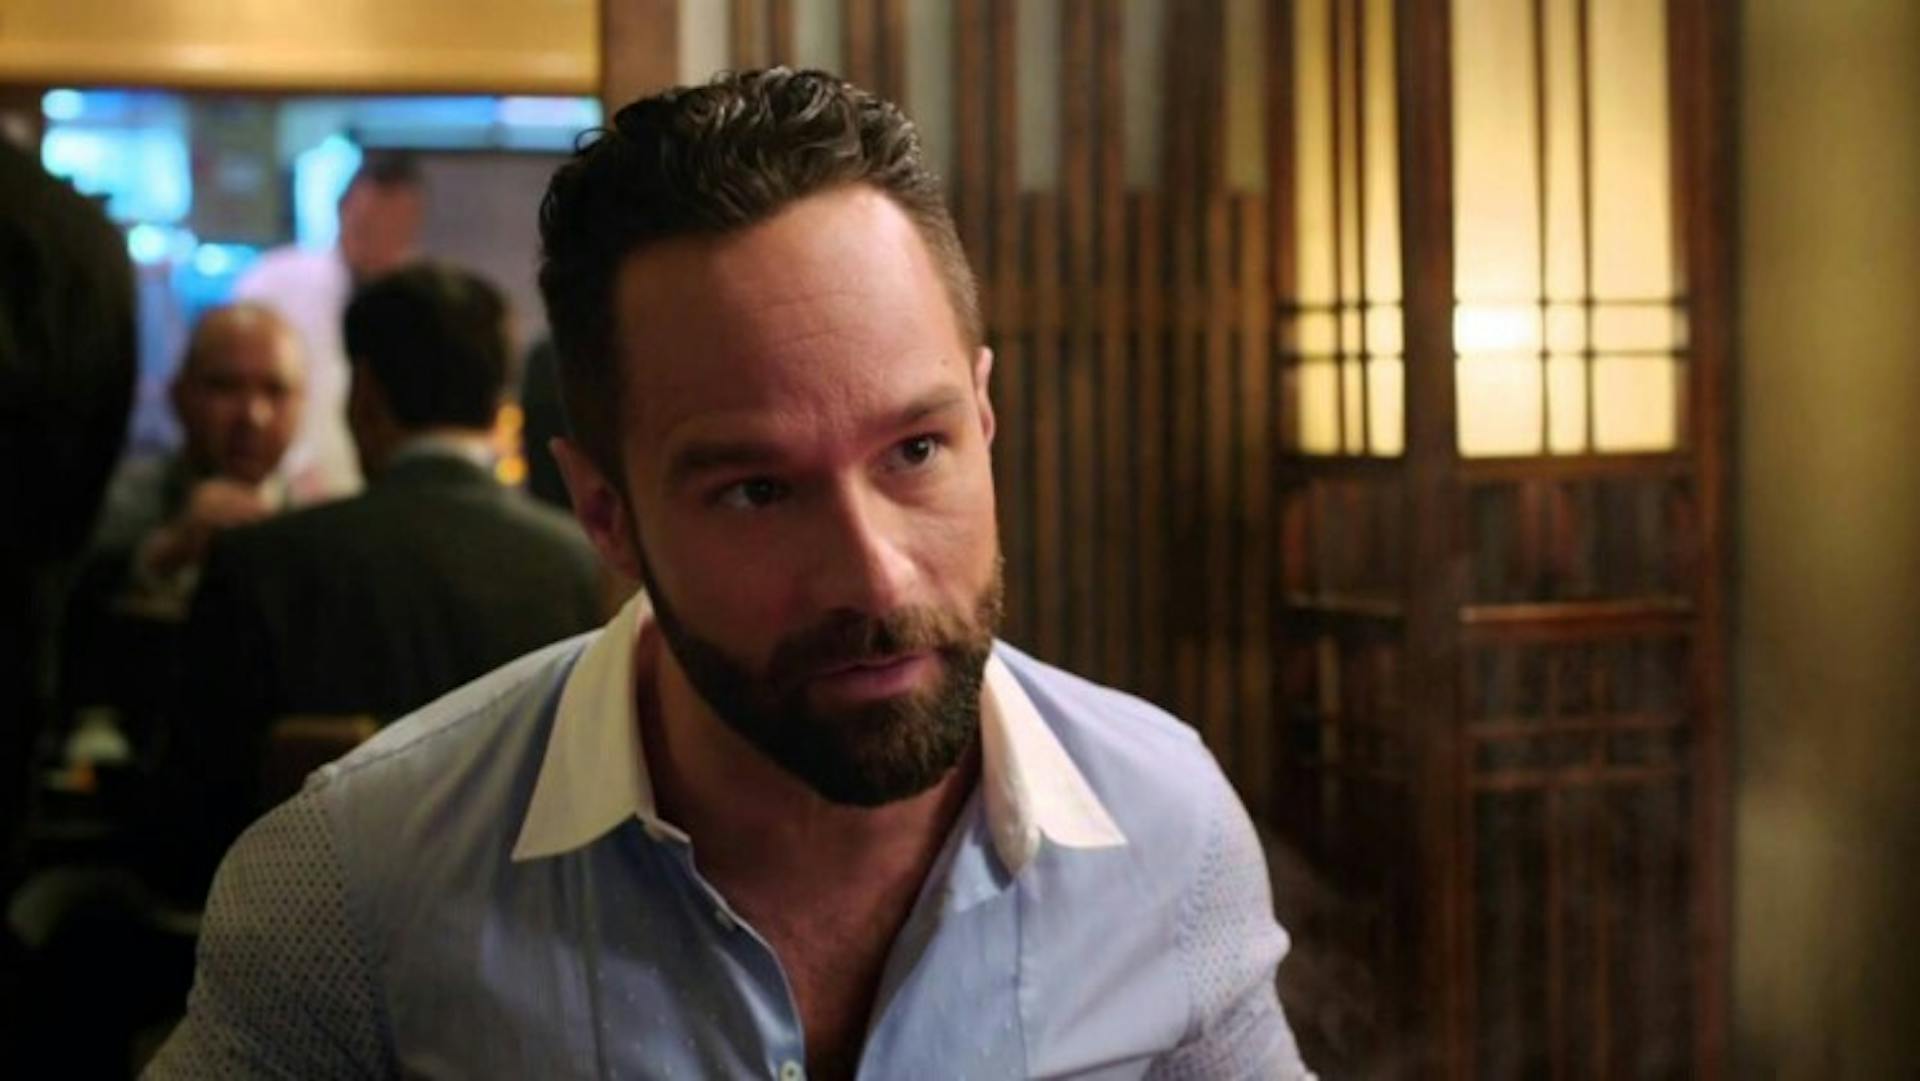 A typical tech bro is Russ Hanneman, the hero of the Silicon Valley series.